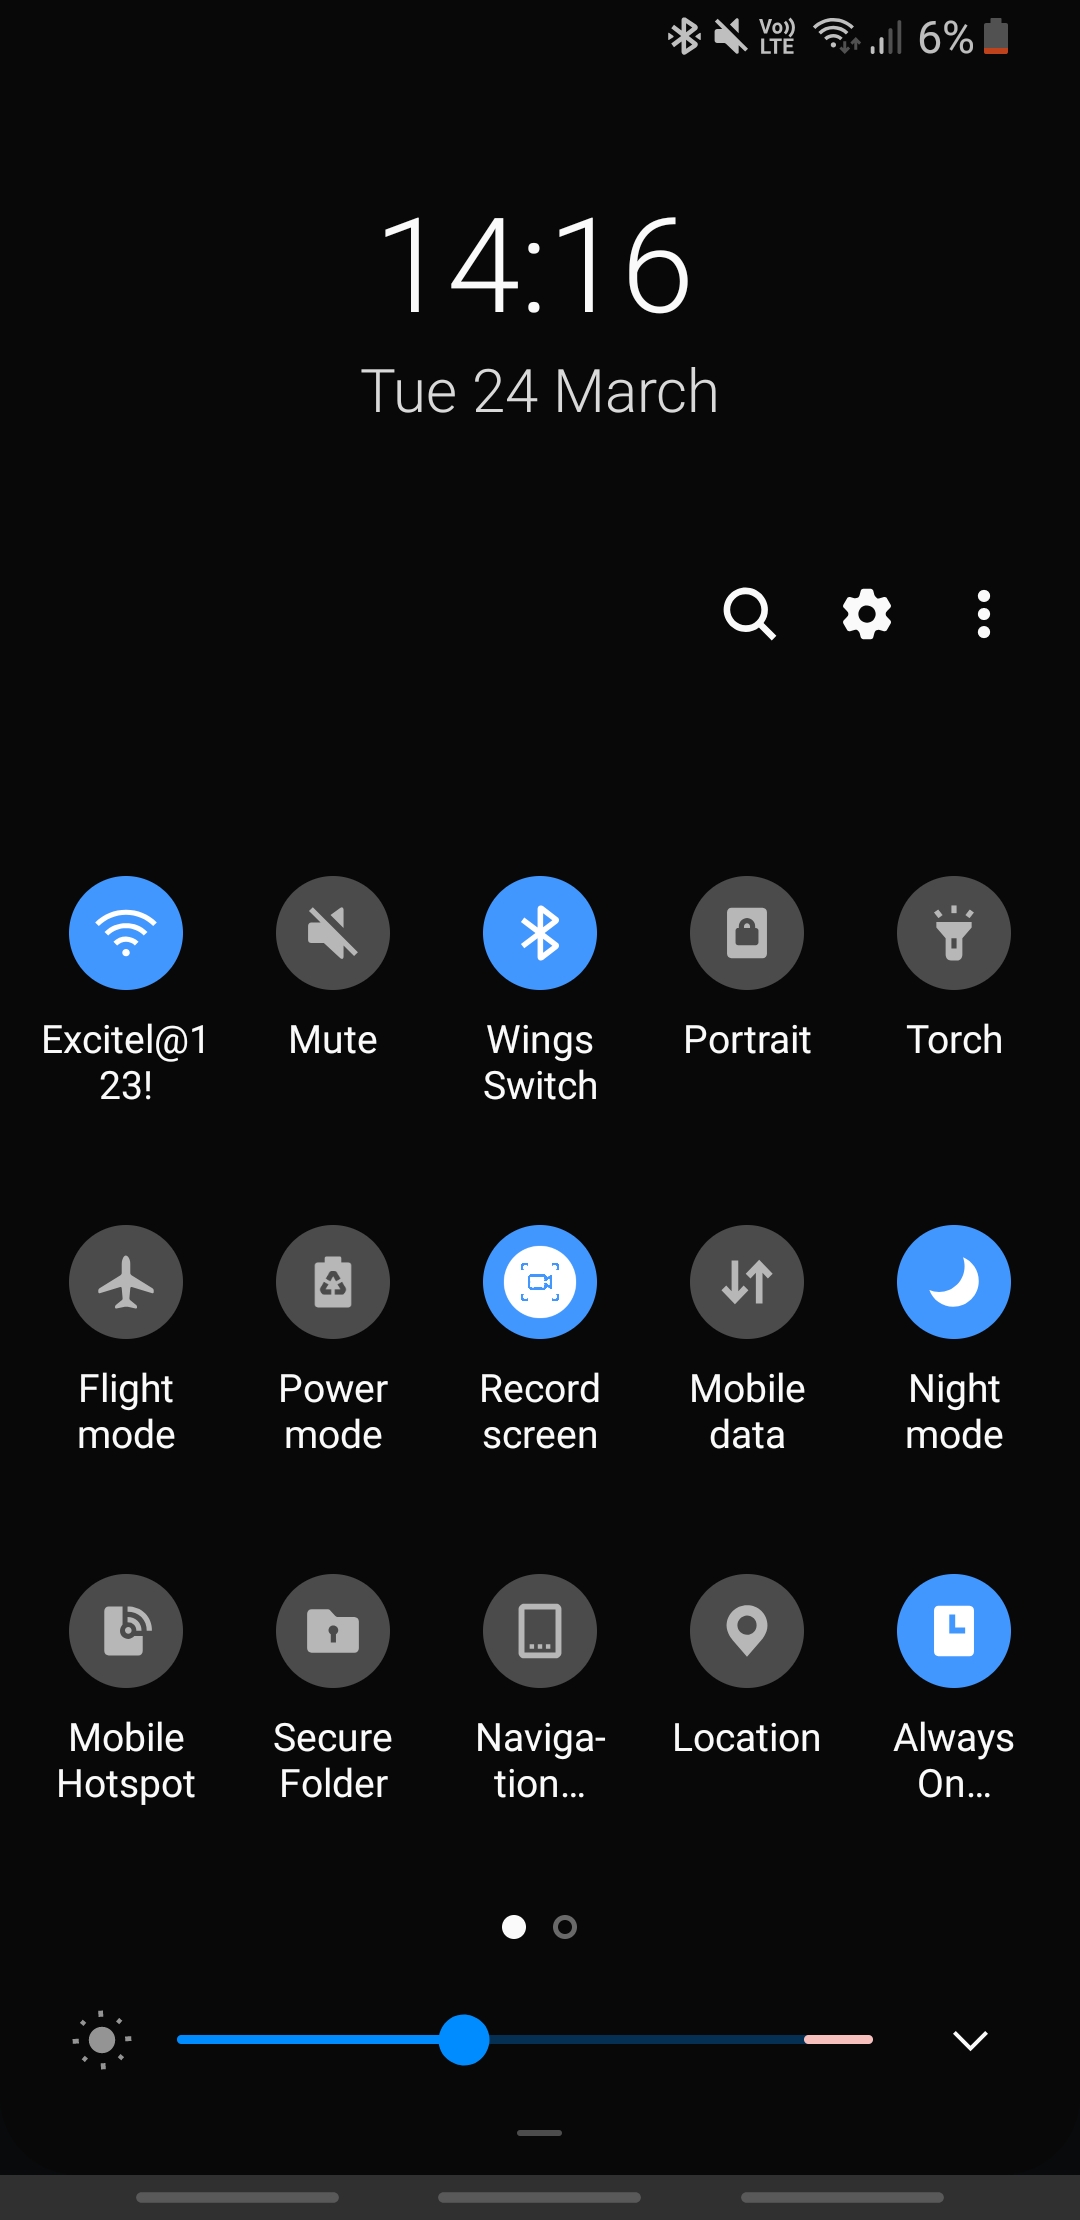 can i record screen in s8?? - Samsung Members